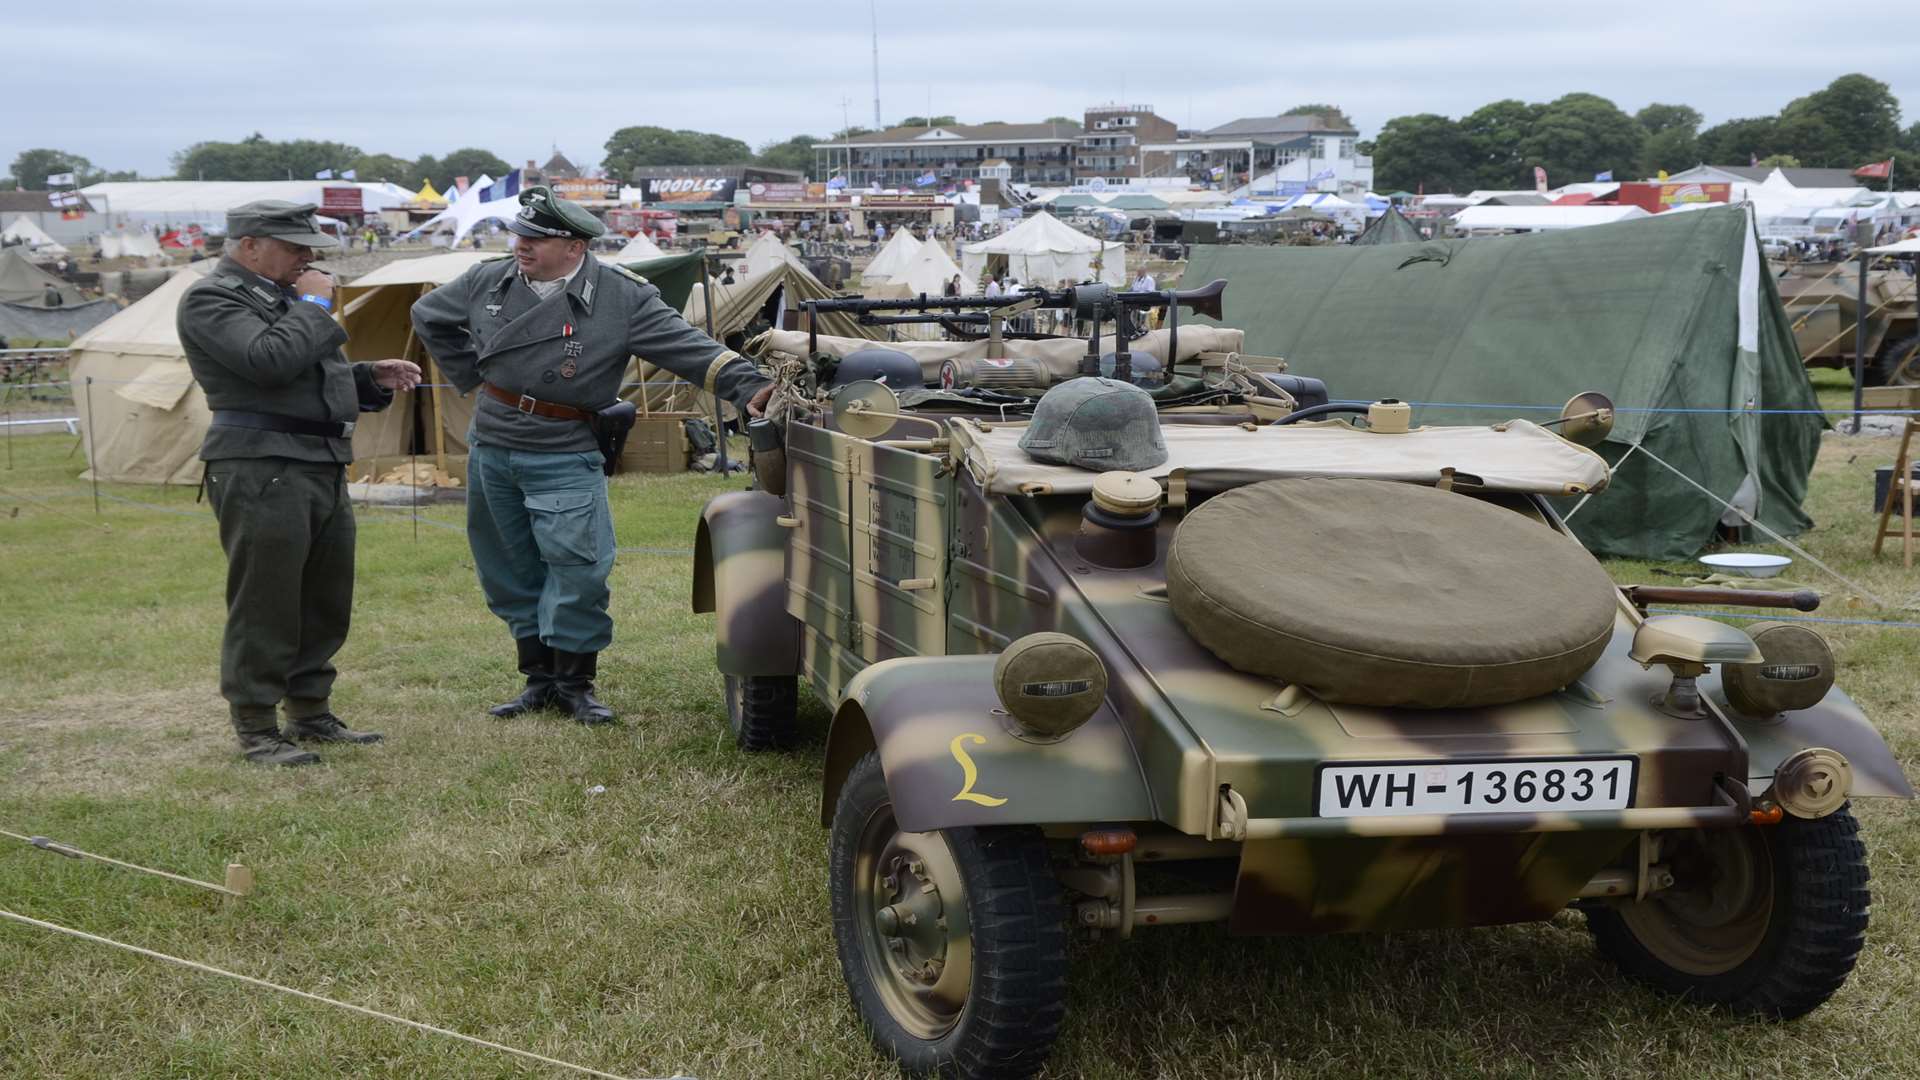 Thousands of military vehicles will descend on the Westenhanger site